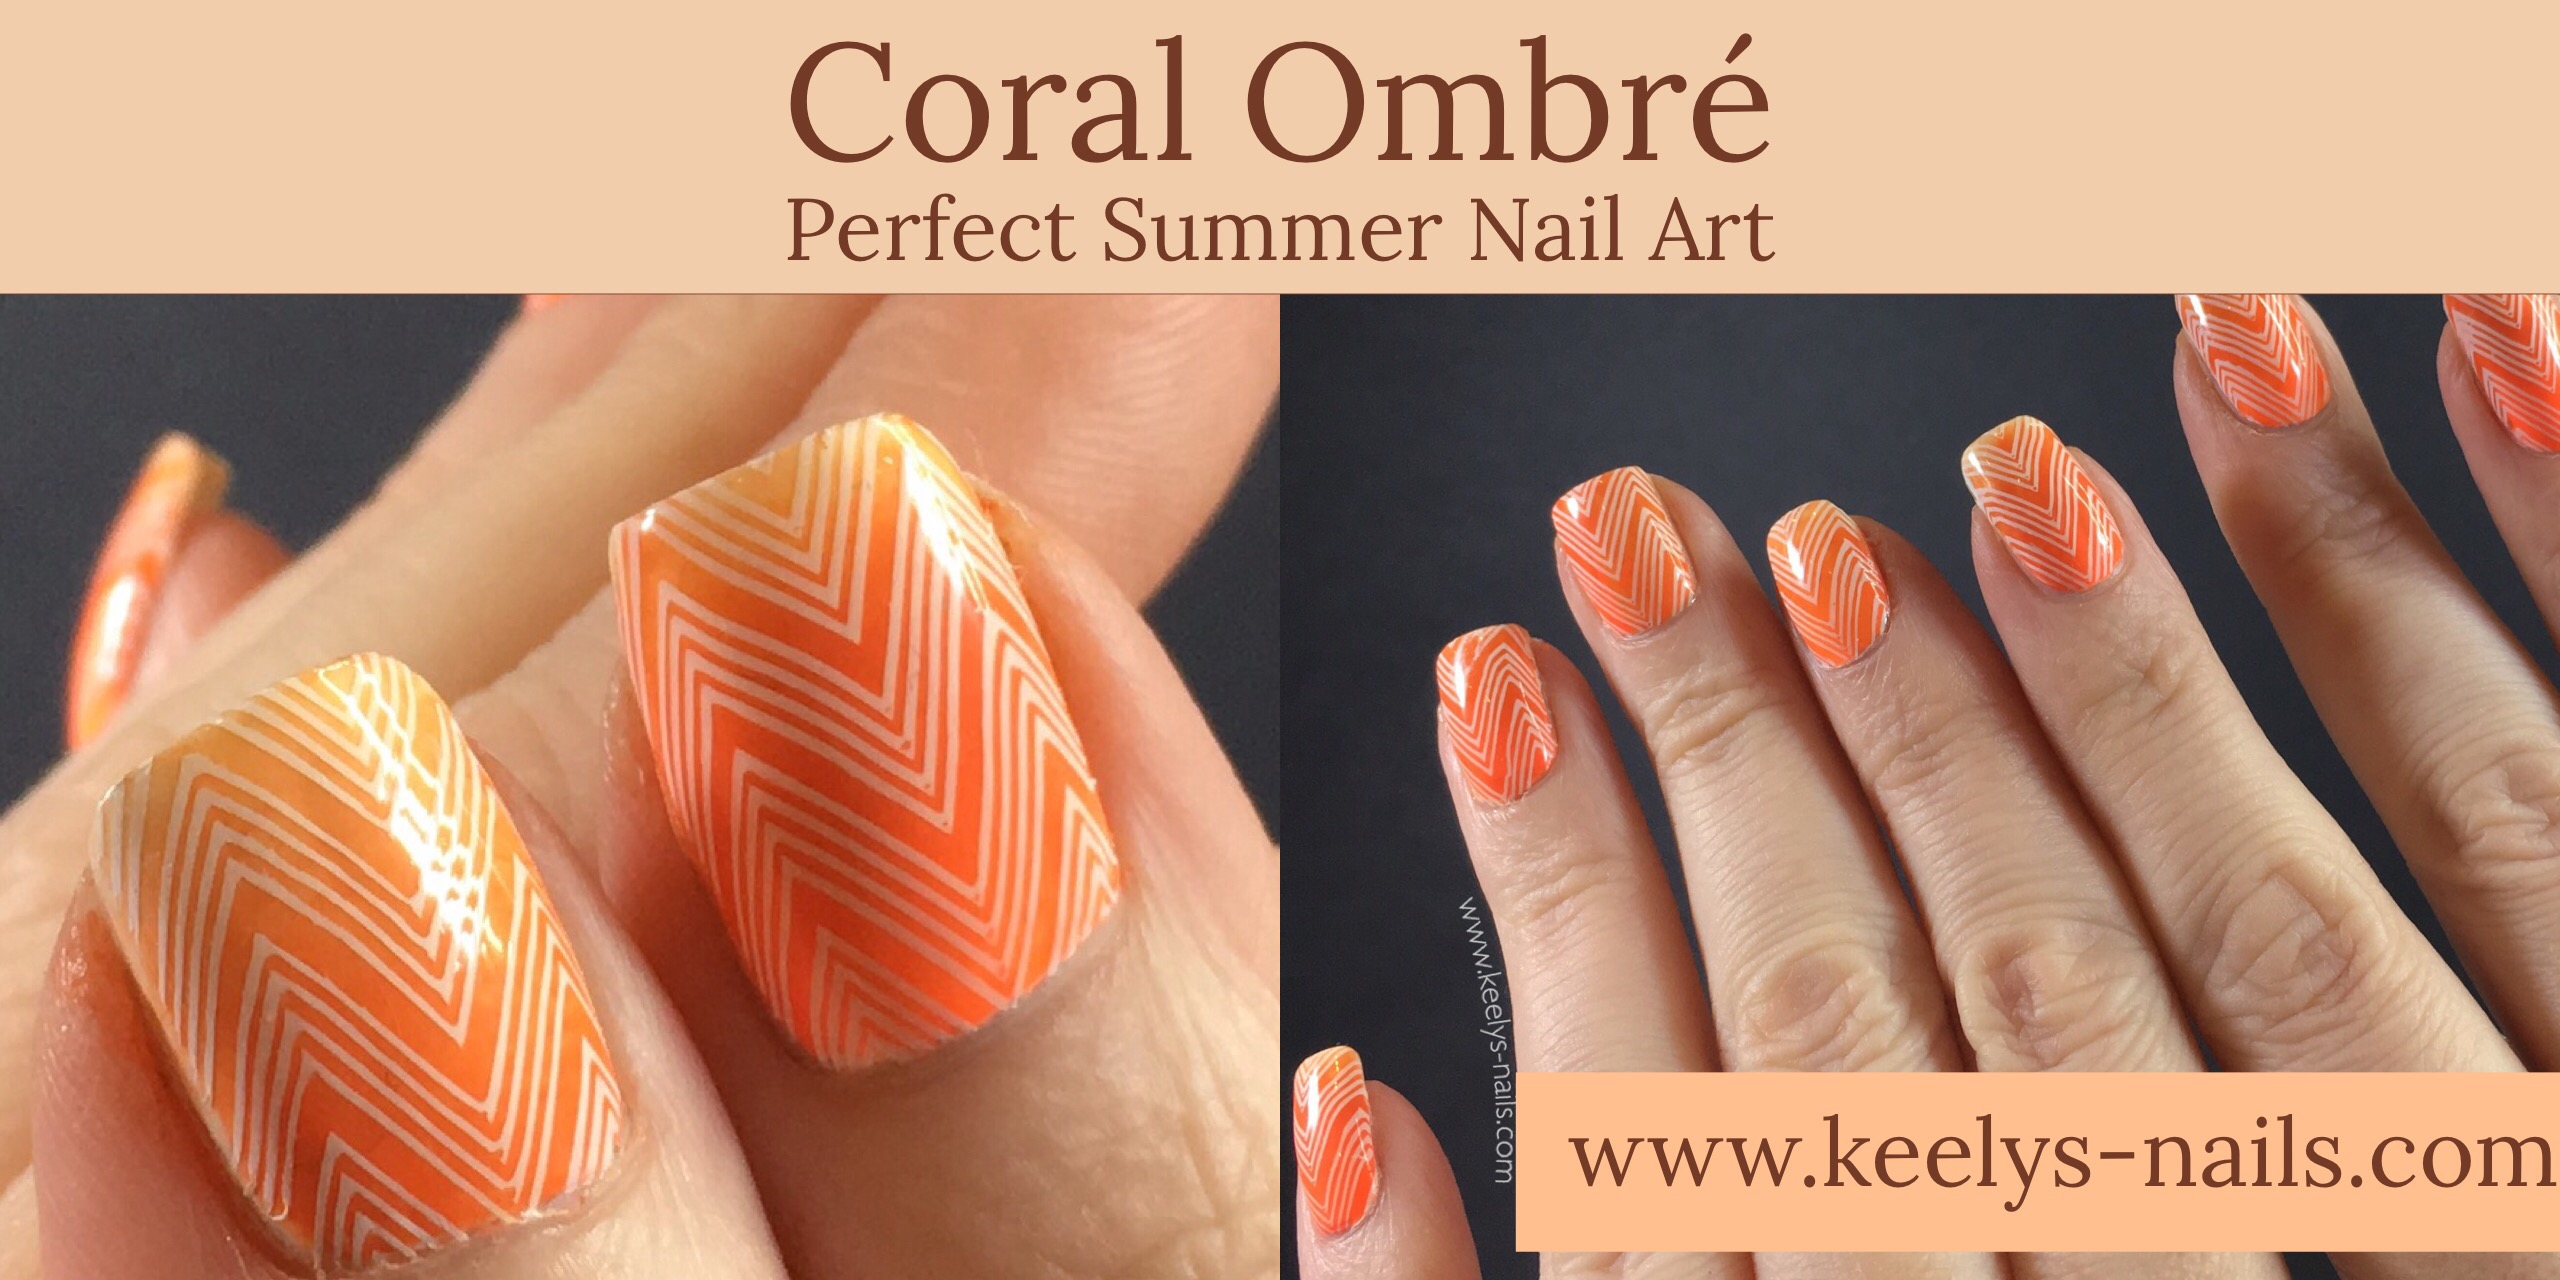 1. Coral Ombre Nail Art Tutorial - wide 5